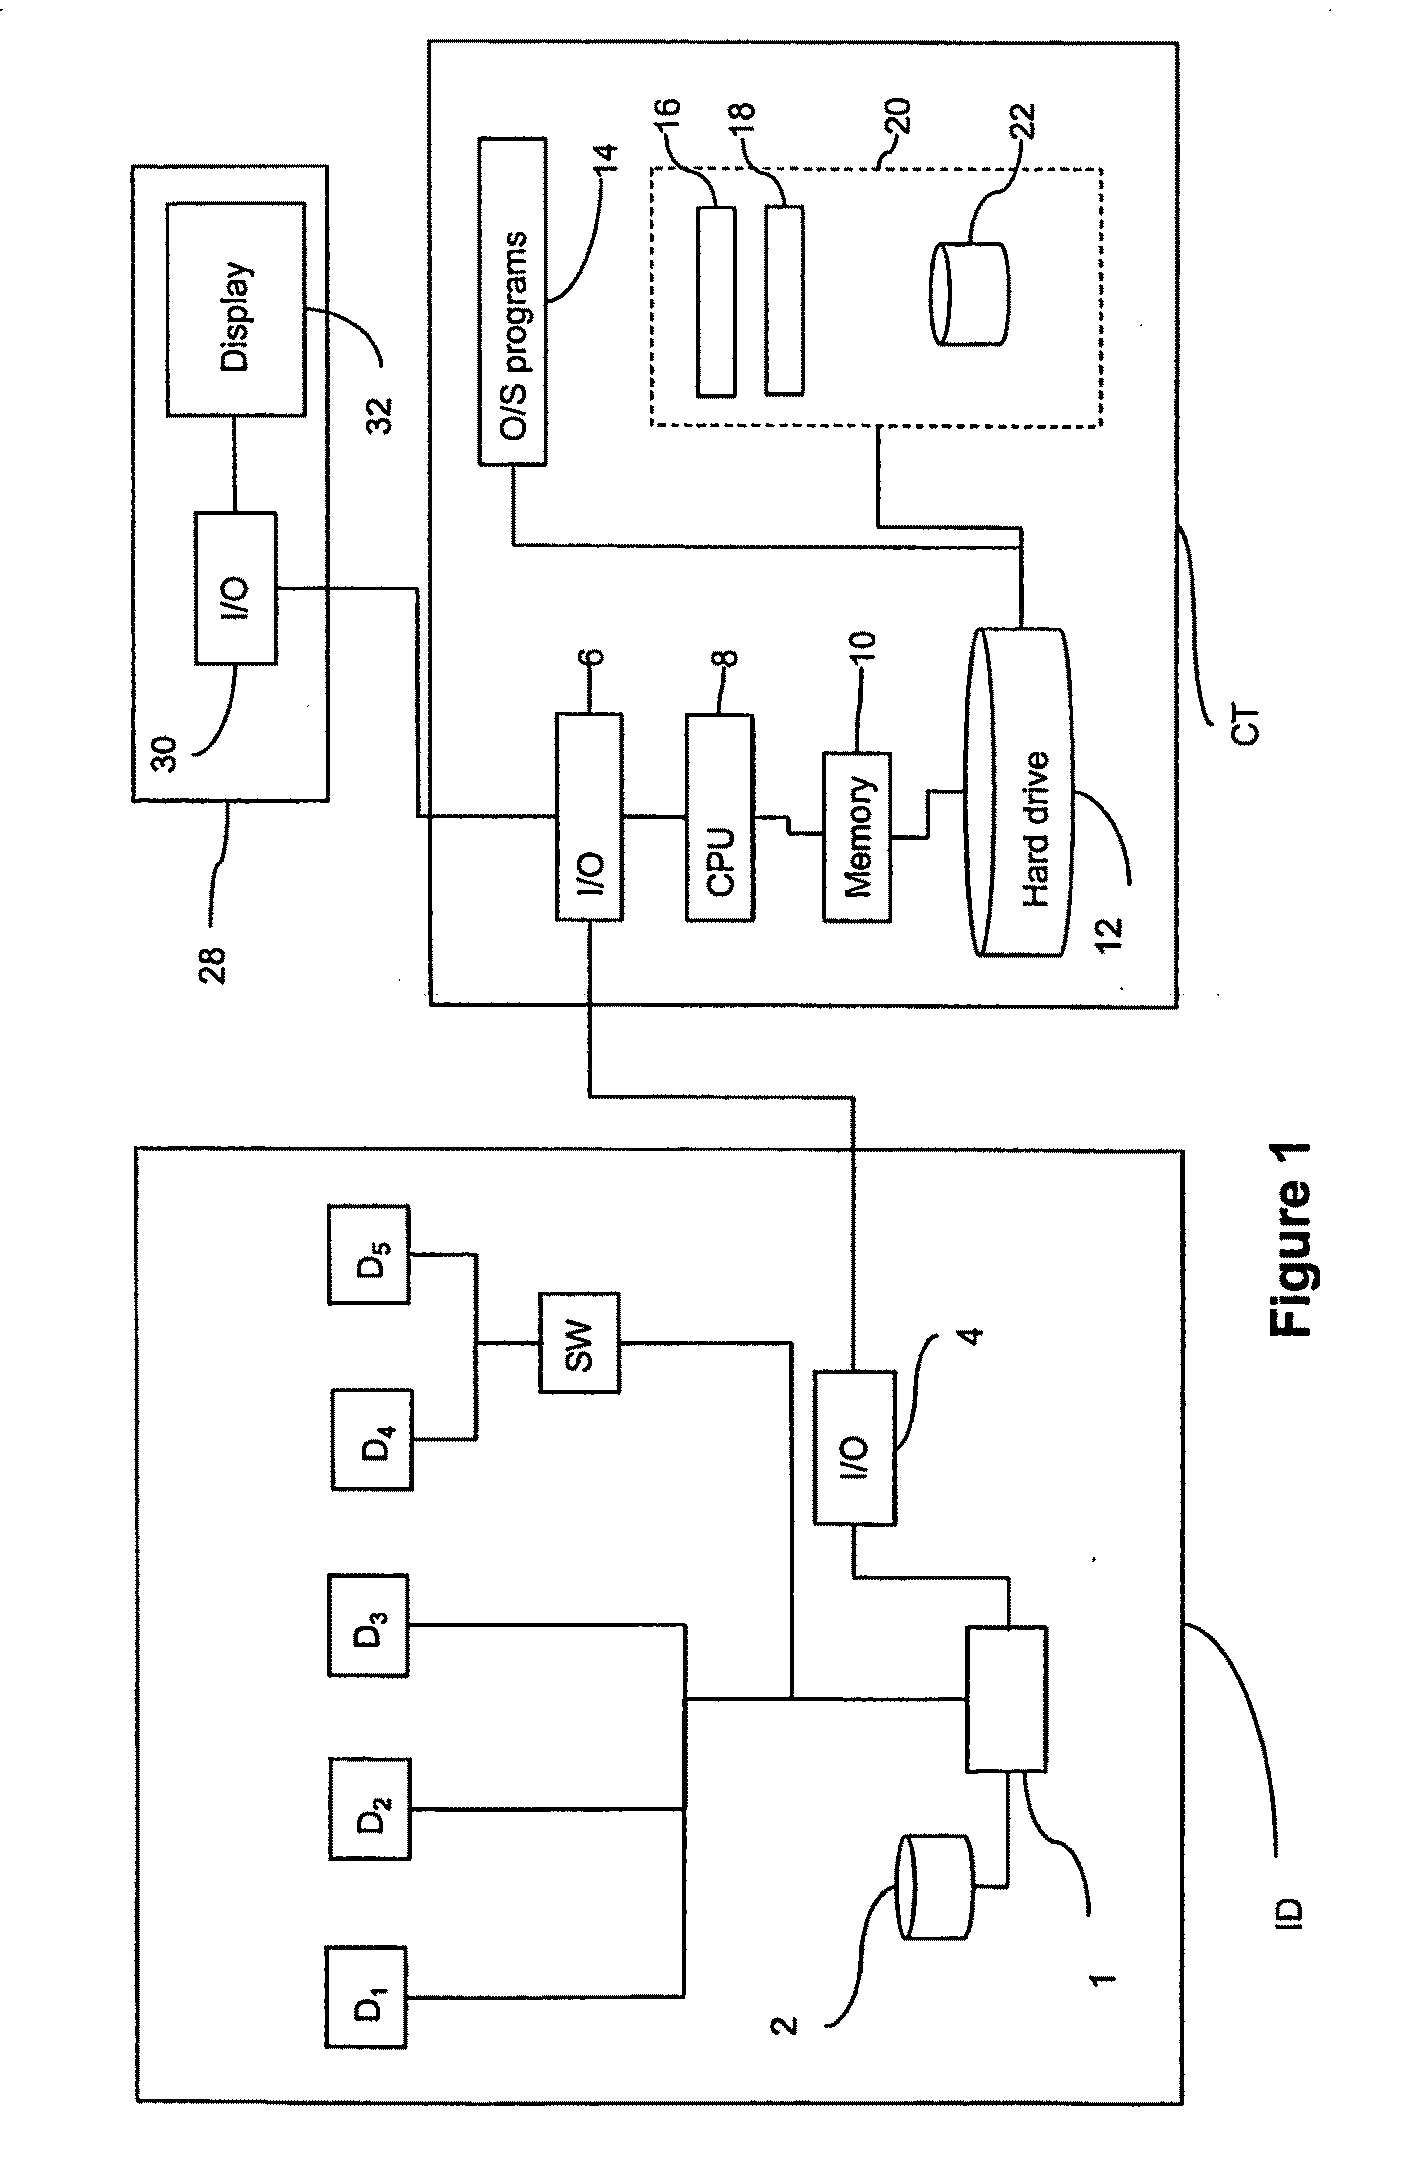 Method of, and apparatus and computer software for, imaging biological objects